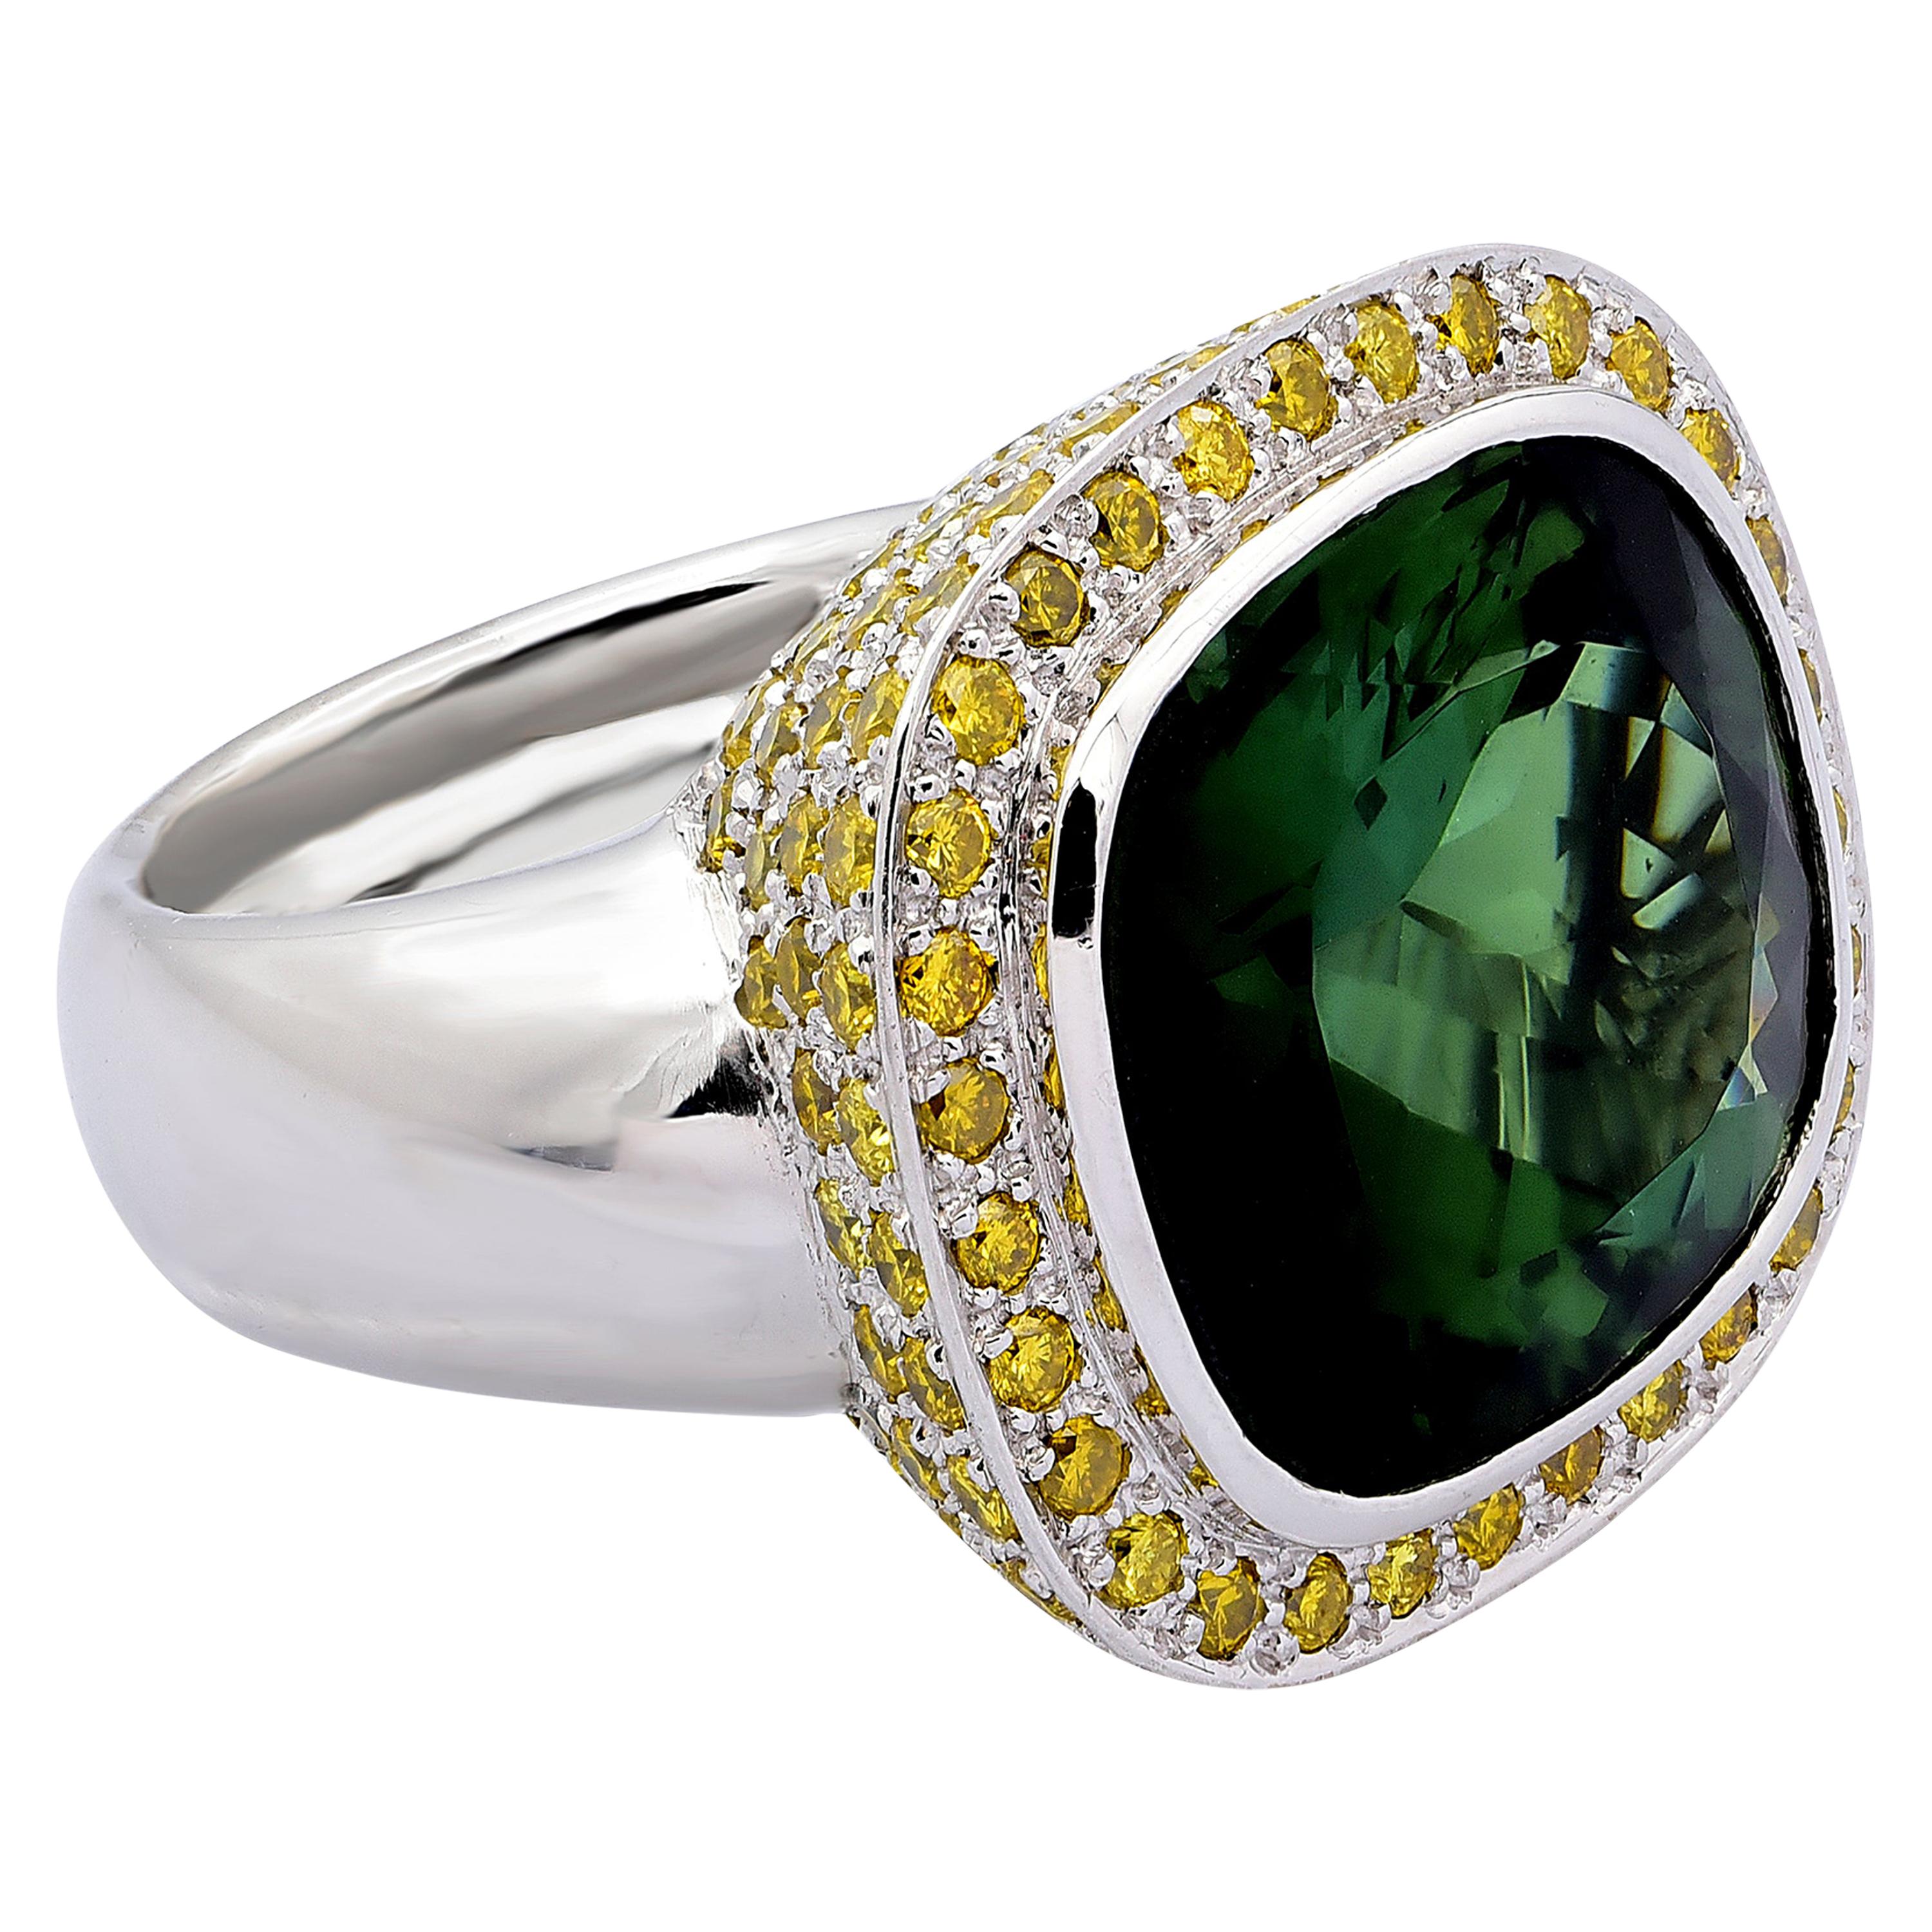 18kt White Gold Ring 21.4ct Natural Tourmaline 137 Diamonds 3.30ct CGL Certified For Sale